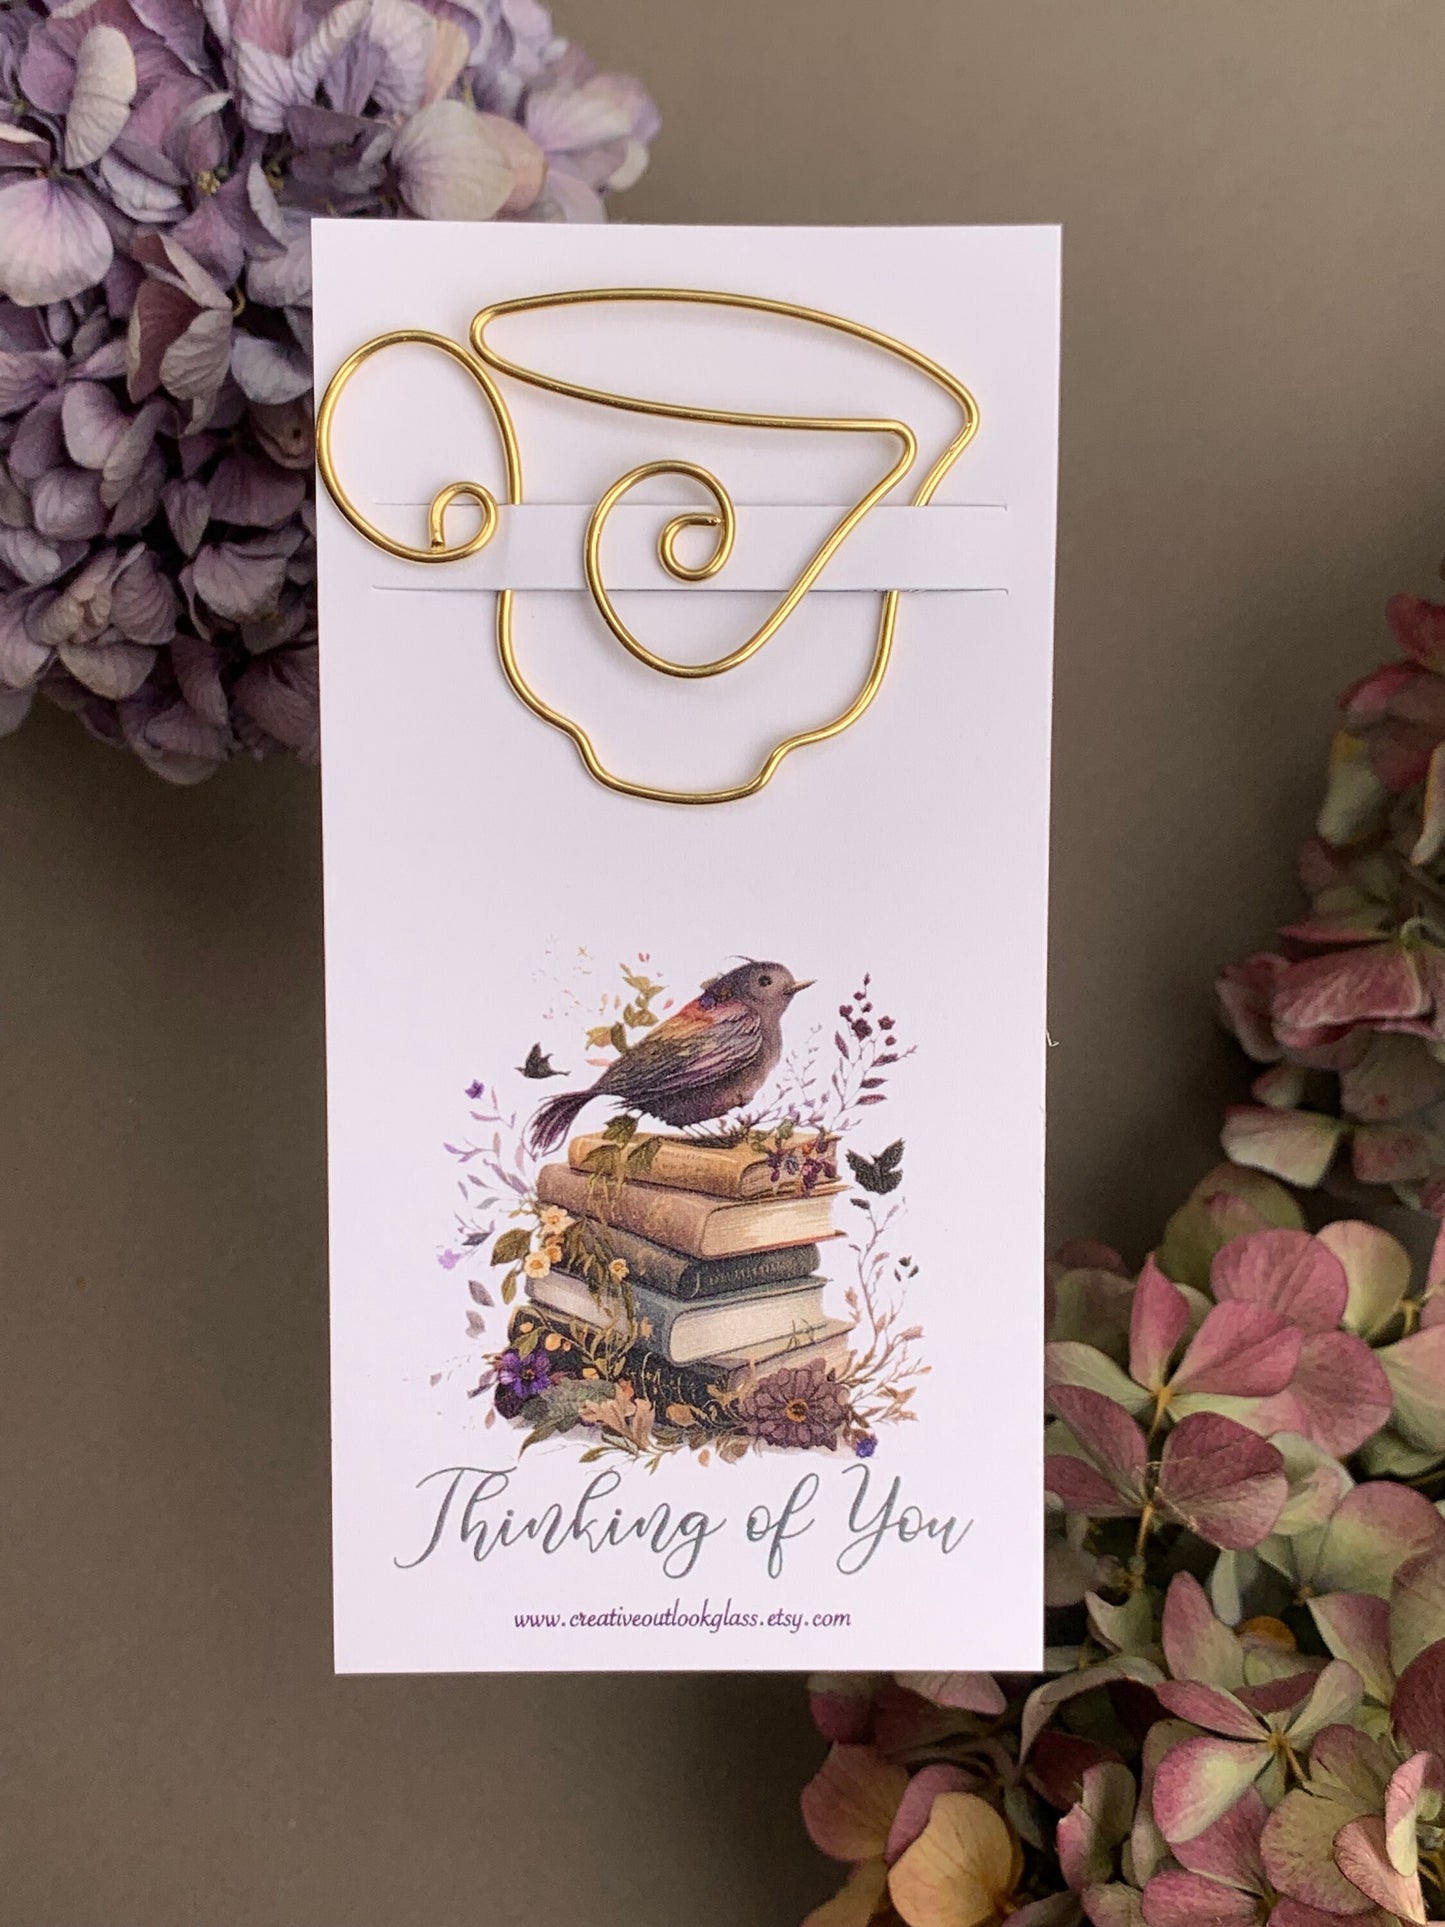 Artisan-Made Thinking of You Card - Handcrafted Literary Bookmark, Ideal Gift for Book Lovers, Appreciation Gift, Gratitude, Thank You Card